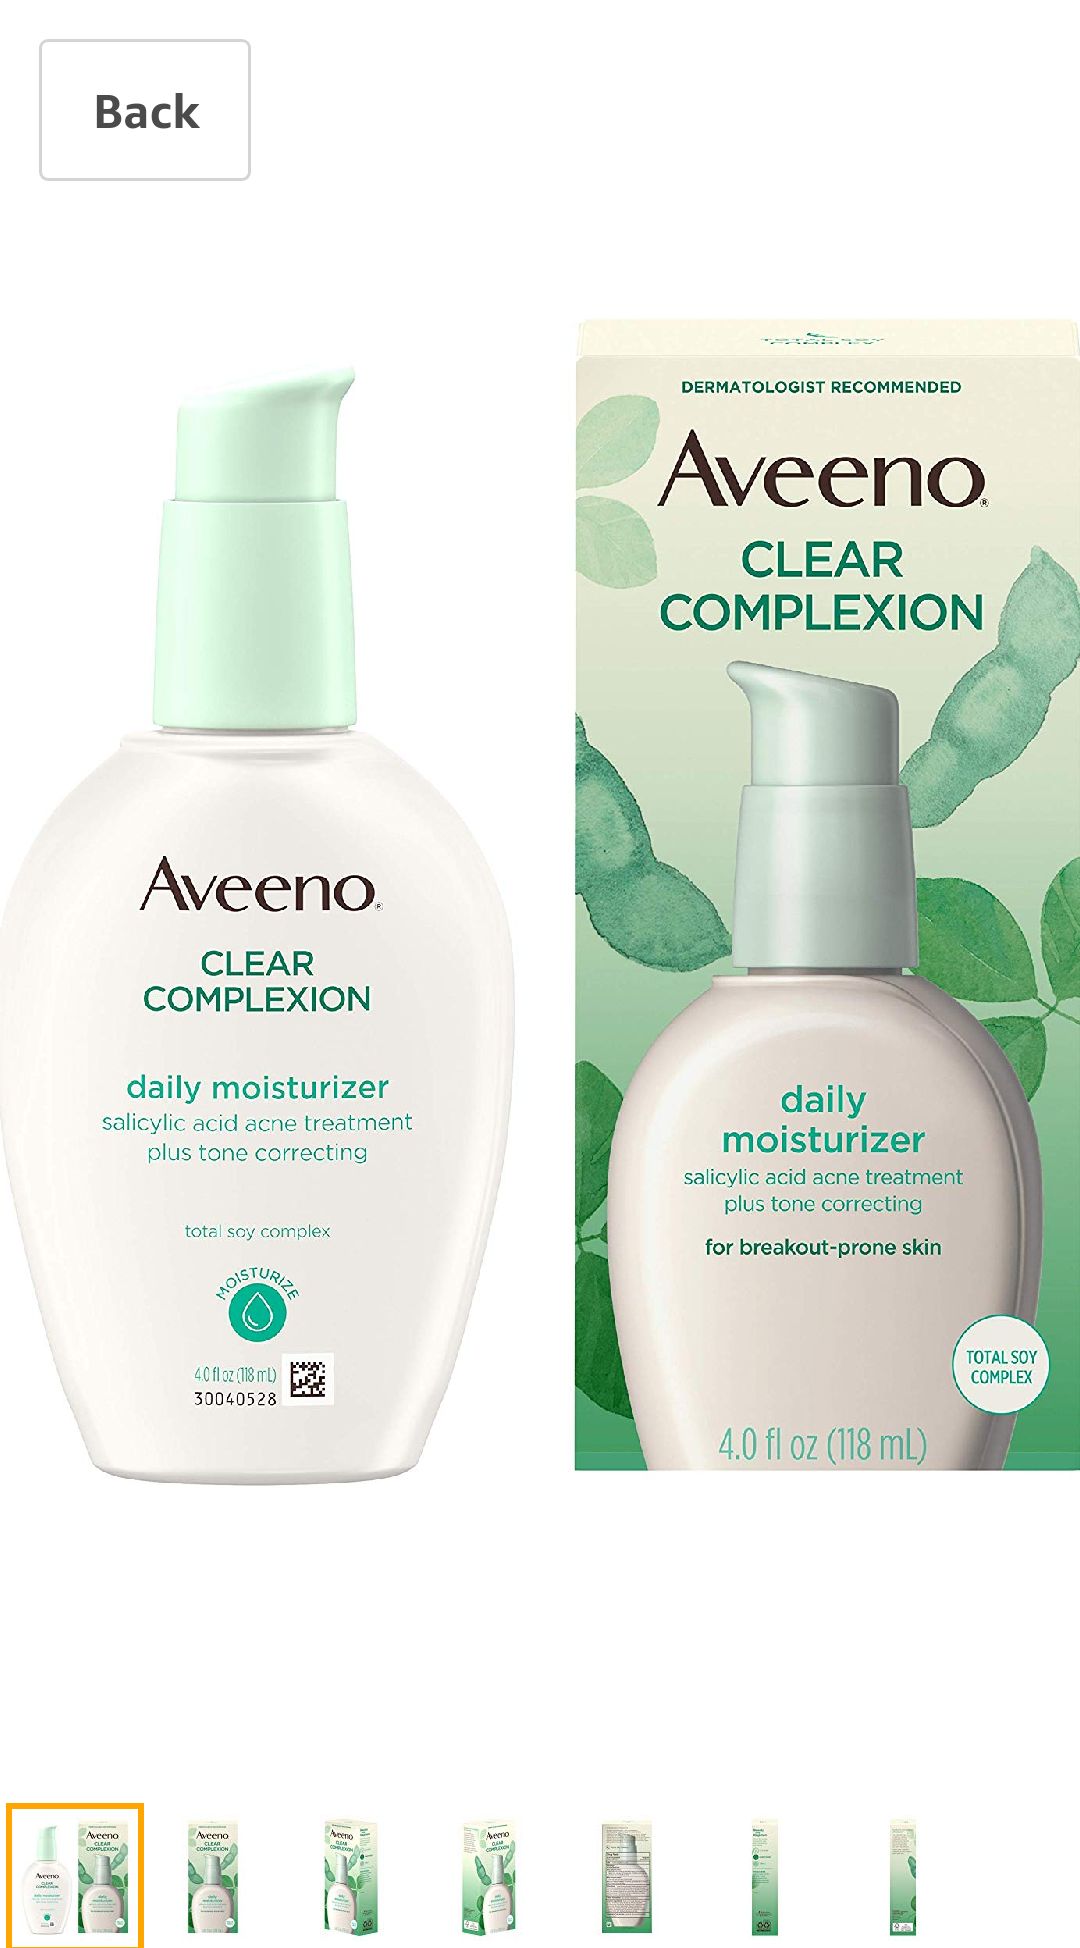 Amazon.com: Aveeno Clear Complexion Salicylic Acid Acne-Fighting Daily Face Moisturizer with Total Soy Complex, For Breakout-Prone Skin, Oil-Free and Hypoallergenic, 4 fl. oz: Beauty面霜